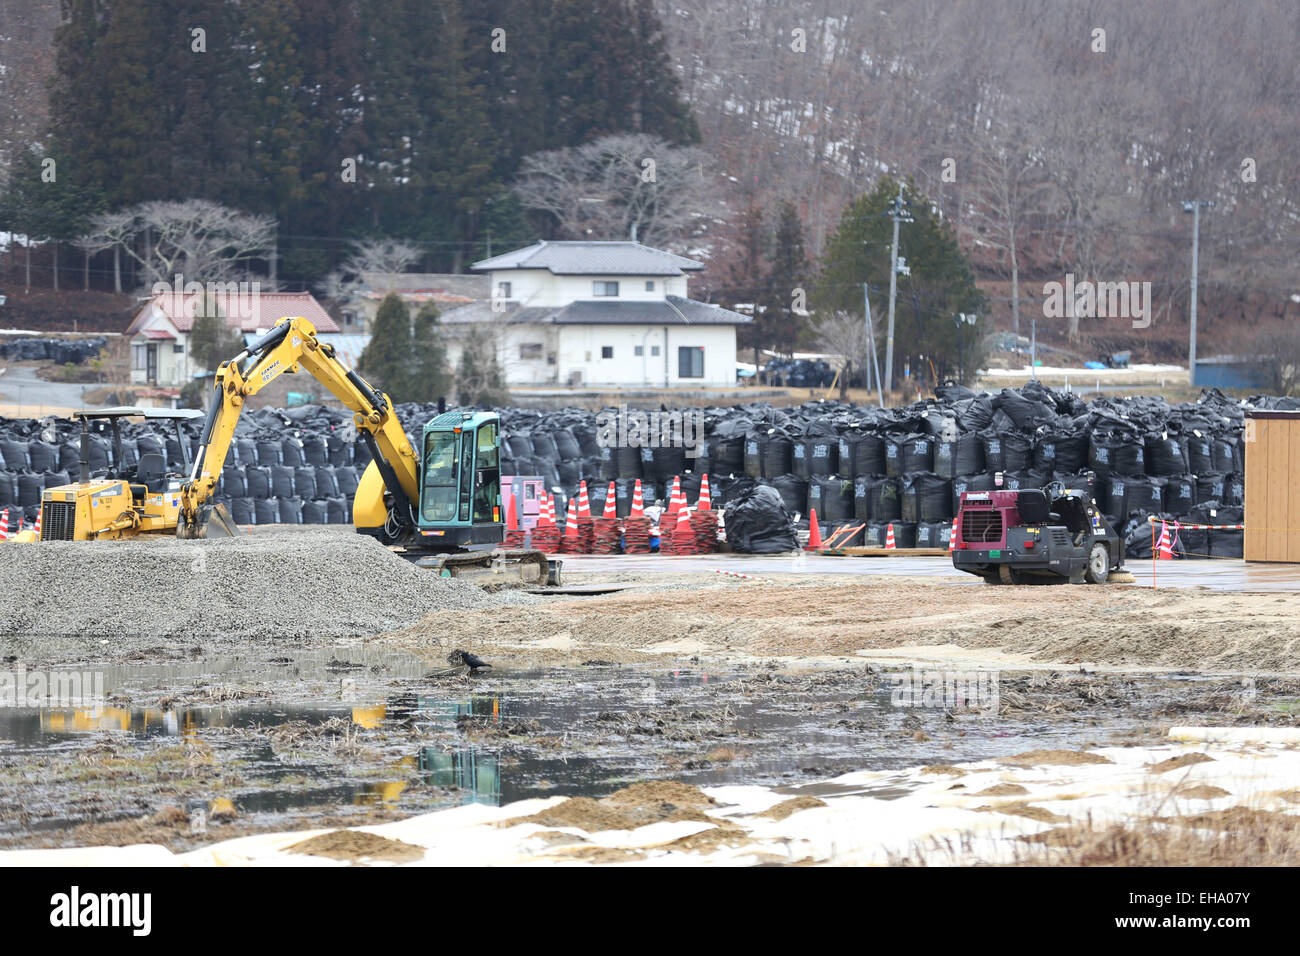 (150310) -- FUKUSHIMA, March 10, 2015 (Xinhua) -- Black bags containing buildup of contaminated wastes are seen in the town of Iitate, Fukushima Prefecture, Japan, March 7, 2015. The scenes from the towns and villages still abandoned four years after an earthquake triggered tsunami breached the defenses of the Fukushima Daiichi nuclear power plant, would make for the perfect backdrop for a post- apocalyptic Hollywood zombie movie, but the trouble would be that the levels of radiation in the area would be too dangerous for the cast and crew. The central government's maxim of 'Everything is unde Stock Photo